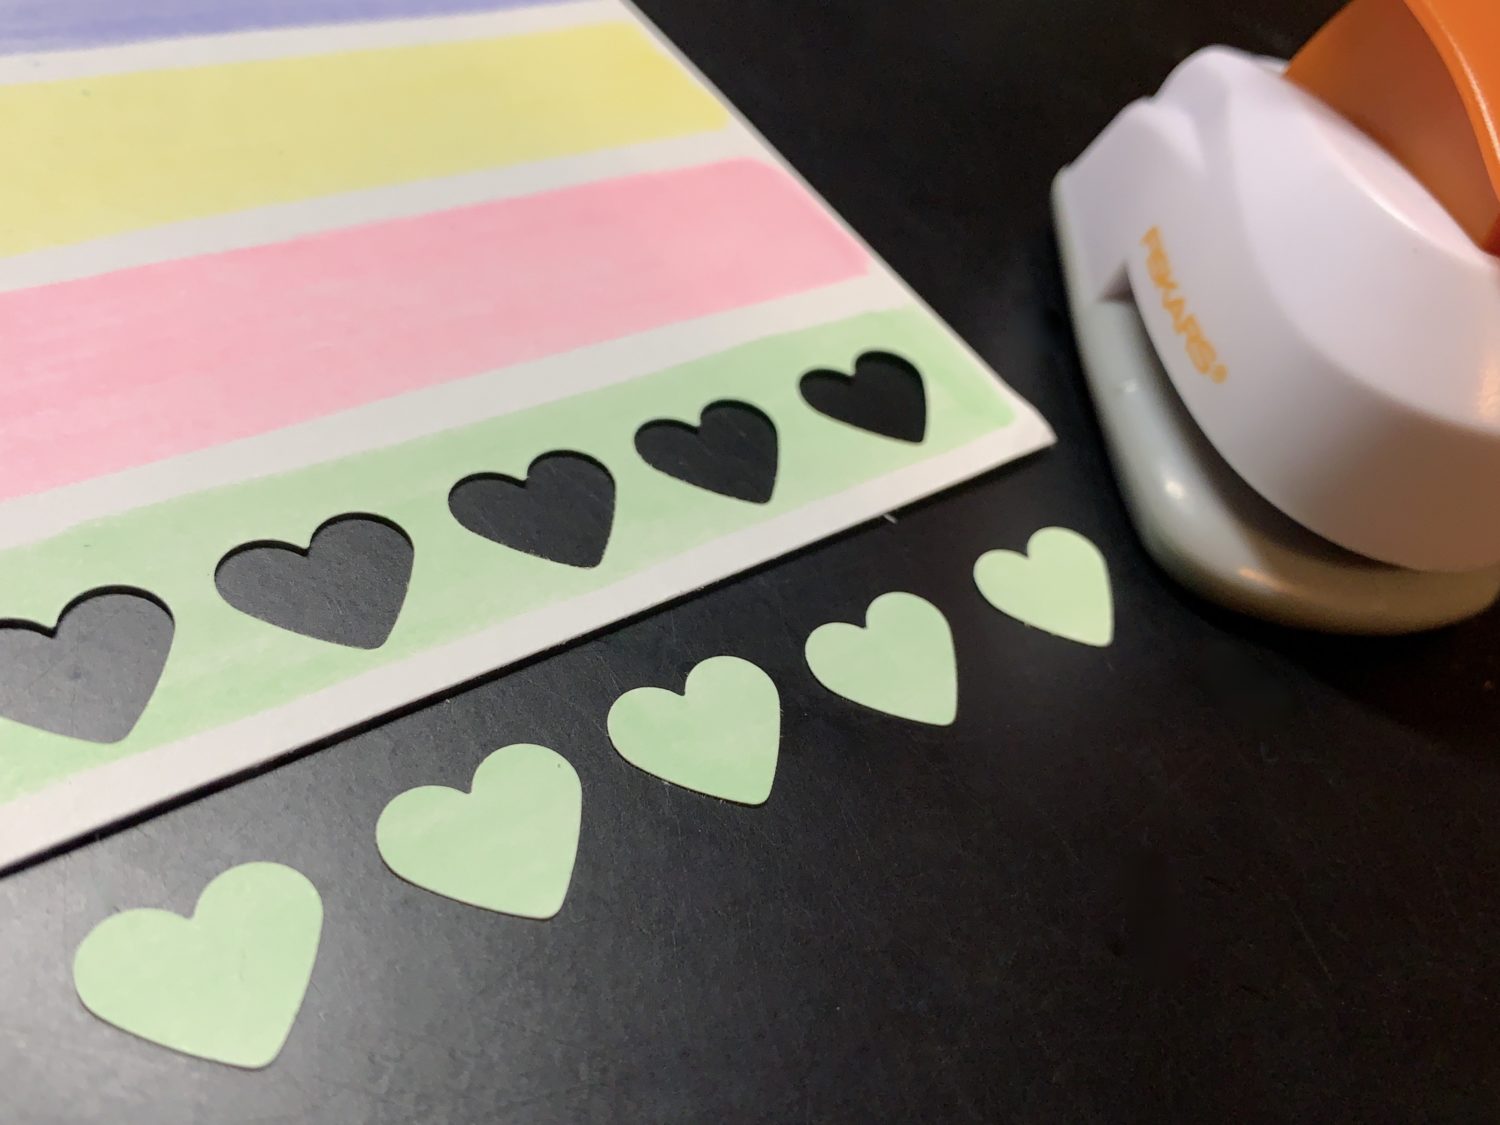 Make this candy heart card using @TombowUSA ABT PRO Alcohol Markers in this tutorial by @LePereLetters. #valentinesdaycraft #galentinesideas #candyhearts